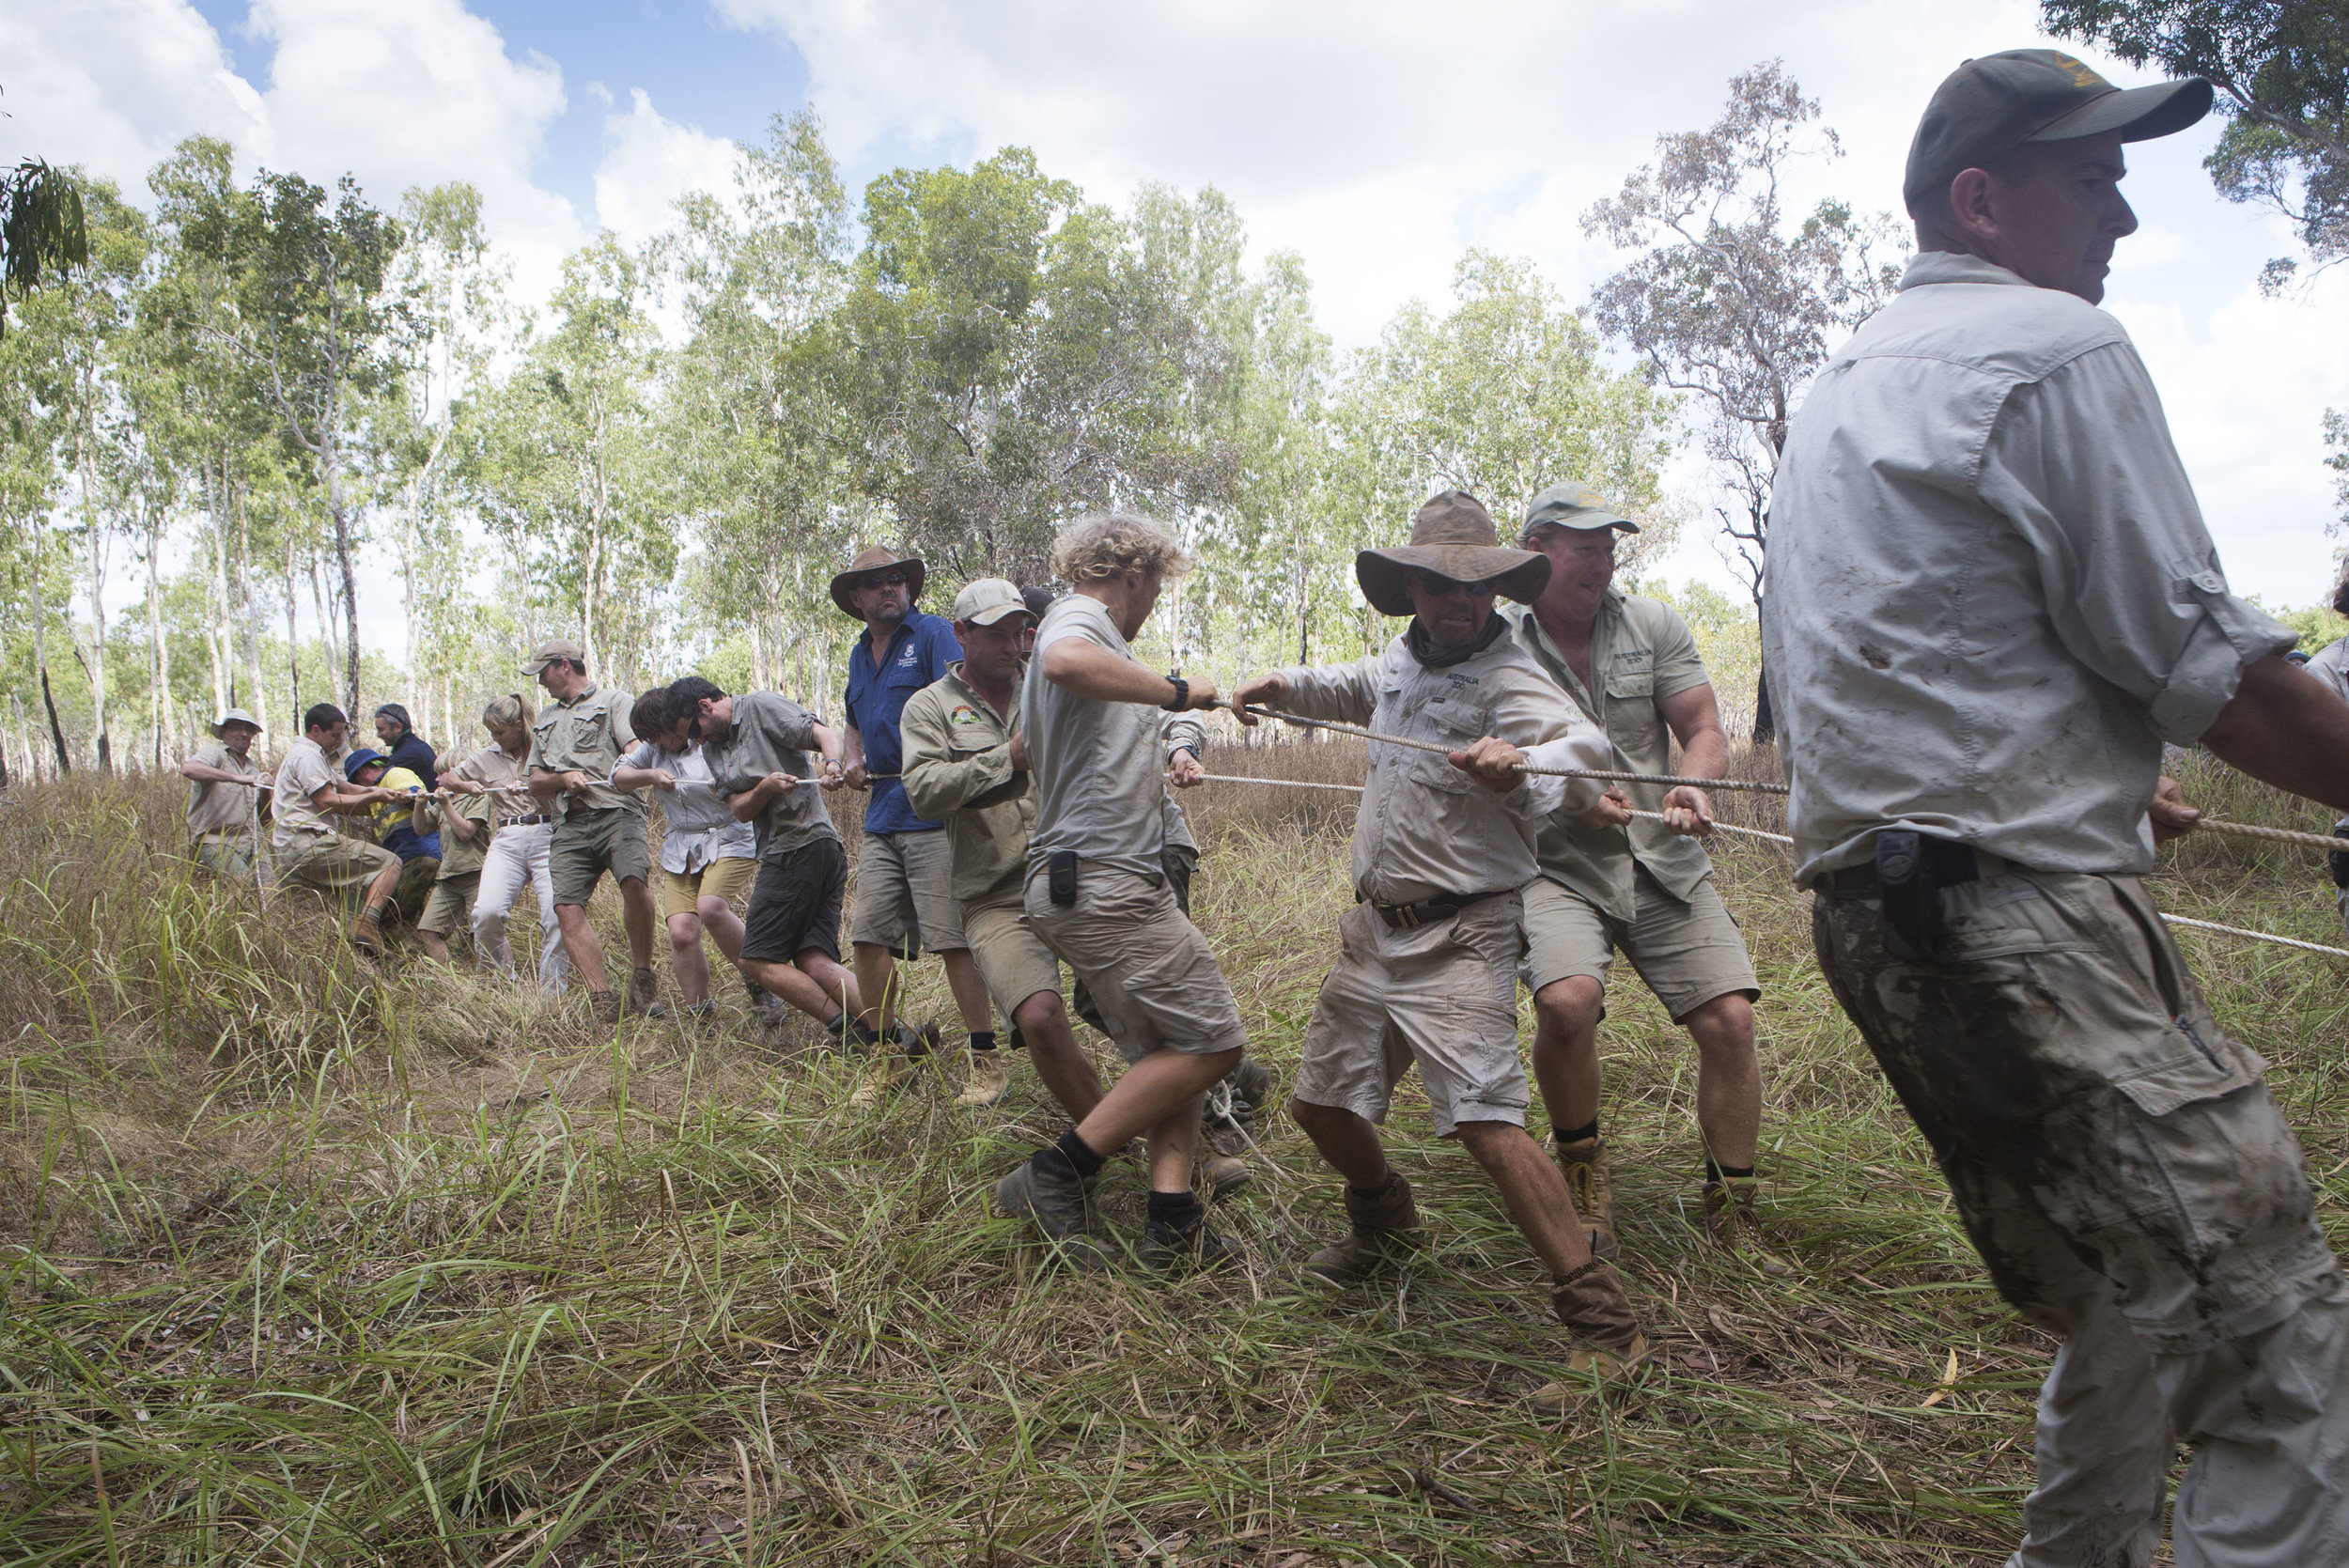  Croc Team all helping to pull the 15.5foot crocodile (in the floating trap onto land)  Steve Irwin Wildlife Reserve, Cape York, Australia.  © Russell Shakespeare/Australia Zoo 